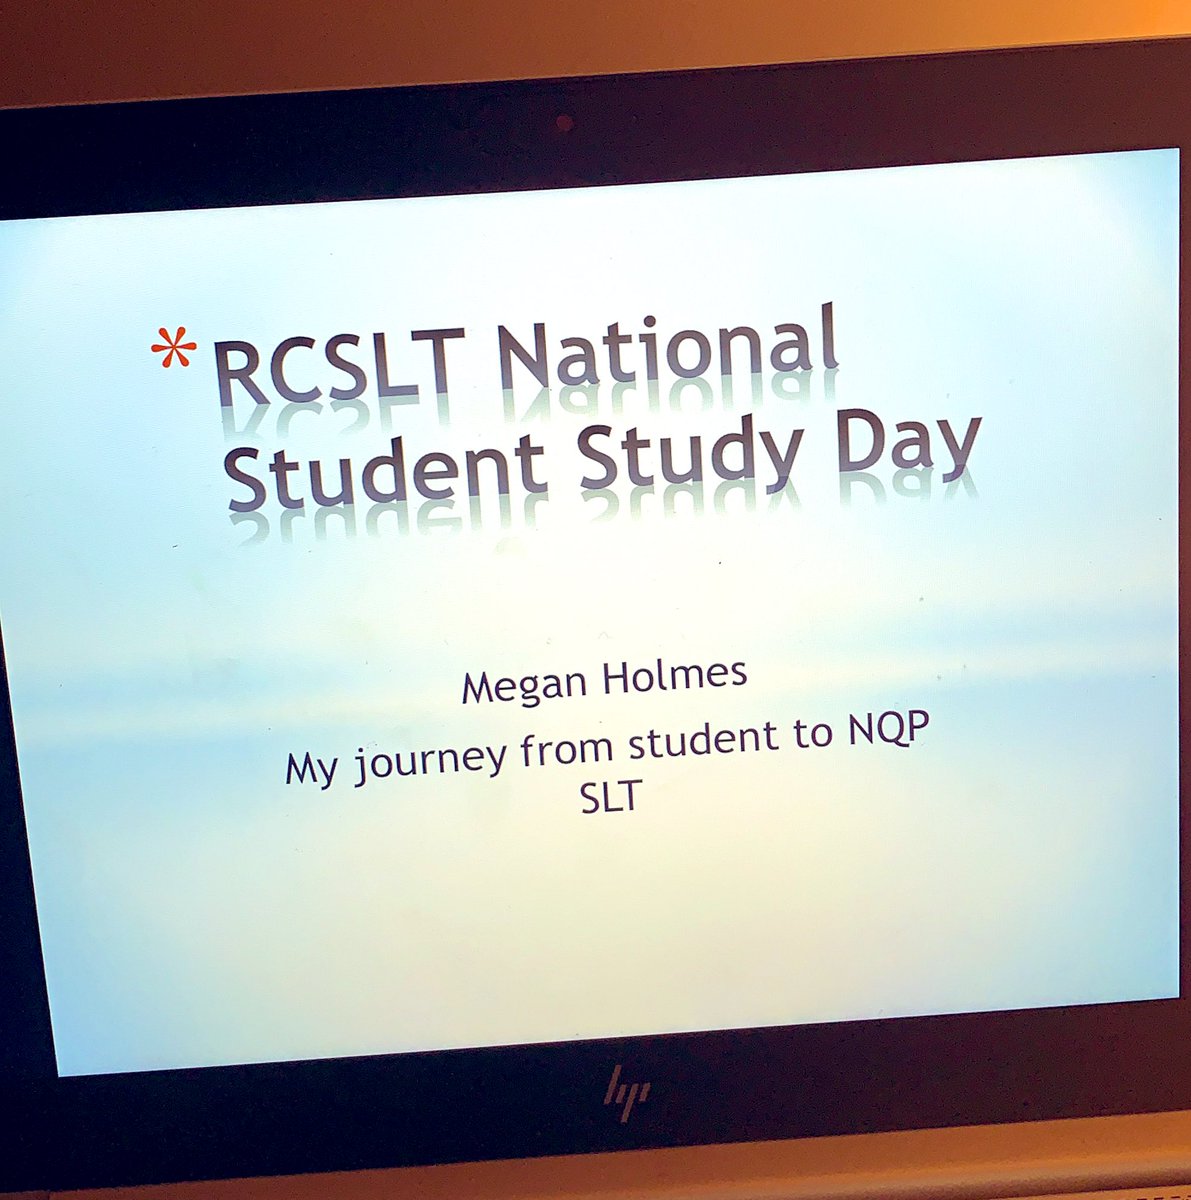 Excited to share my experiences as a NQP tomorrow! #RCSLTStudentDay I hope the day is informative for all #sltstobe! @RCSLT 👩🏻‍🎓☺️